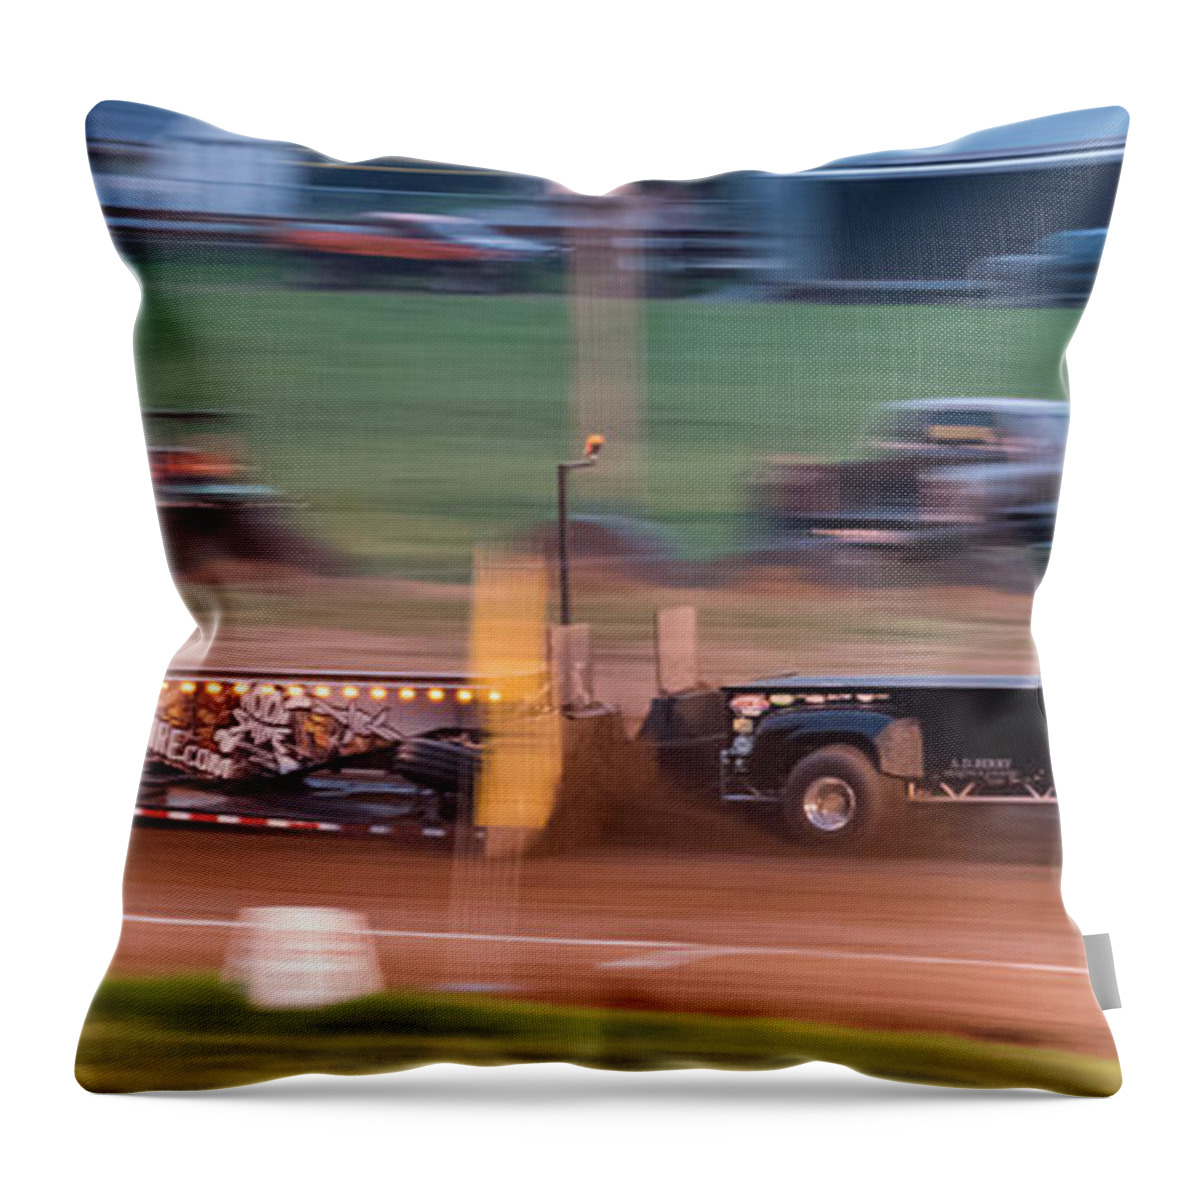 Black Diamond Throw Pillow featuring the photograph Black Diamond by Holden The Moment